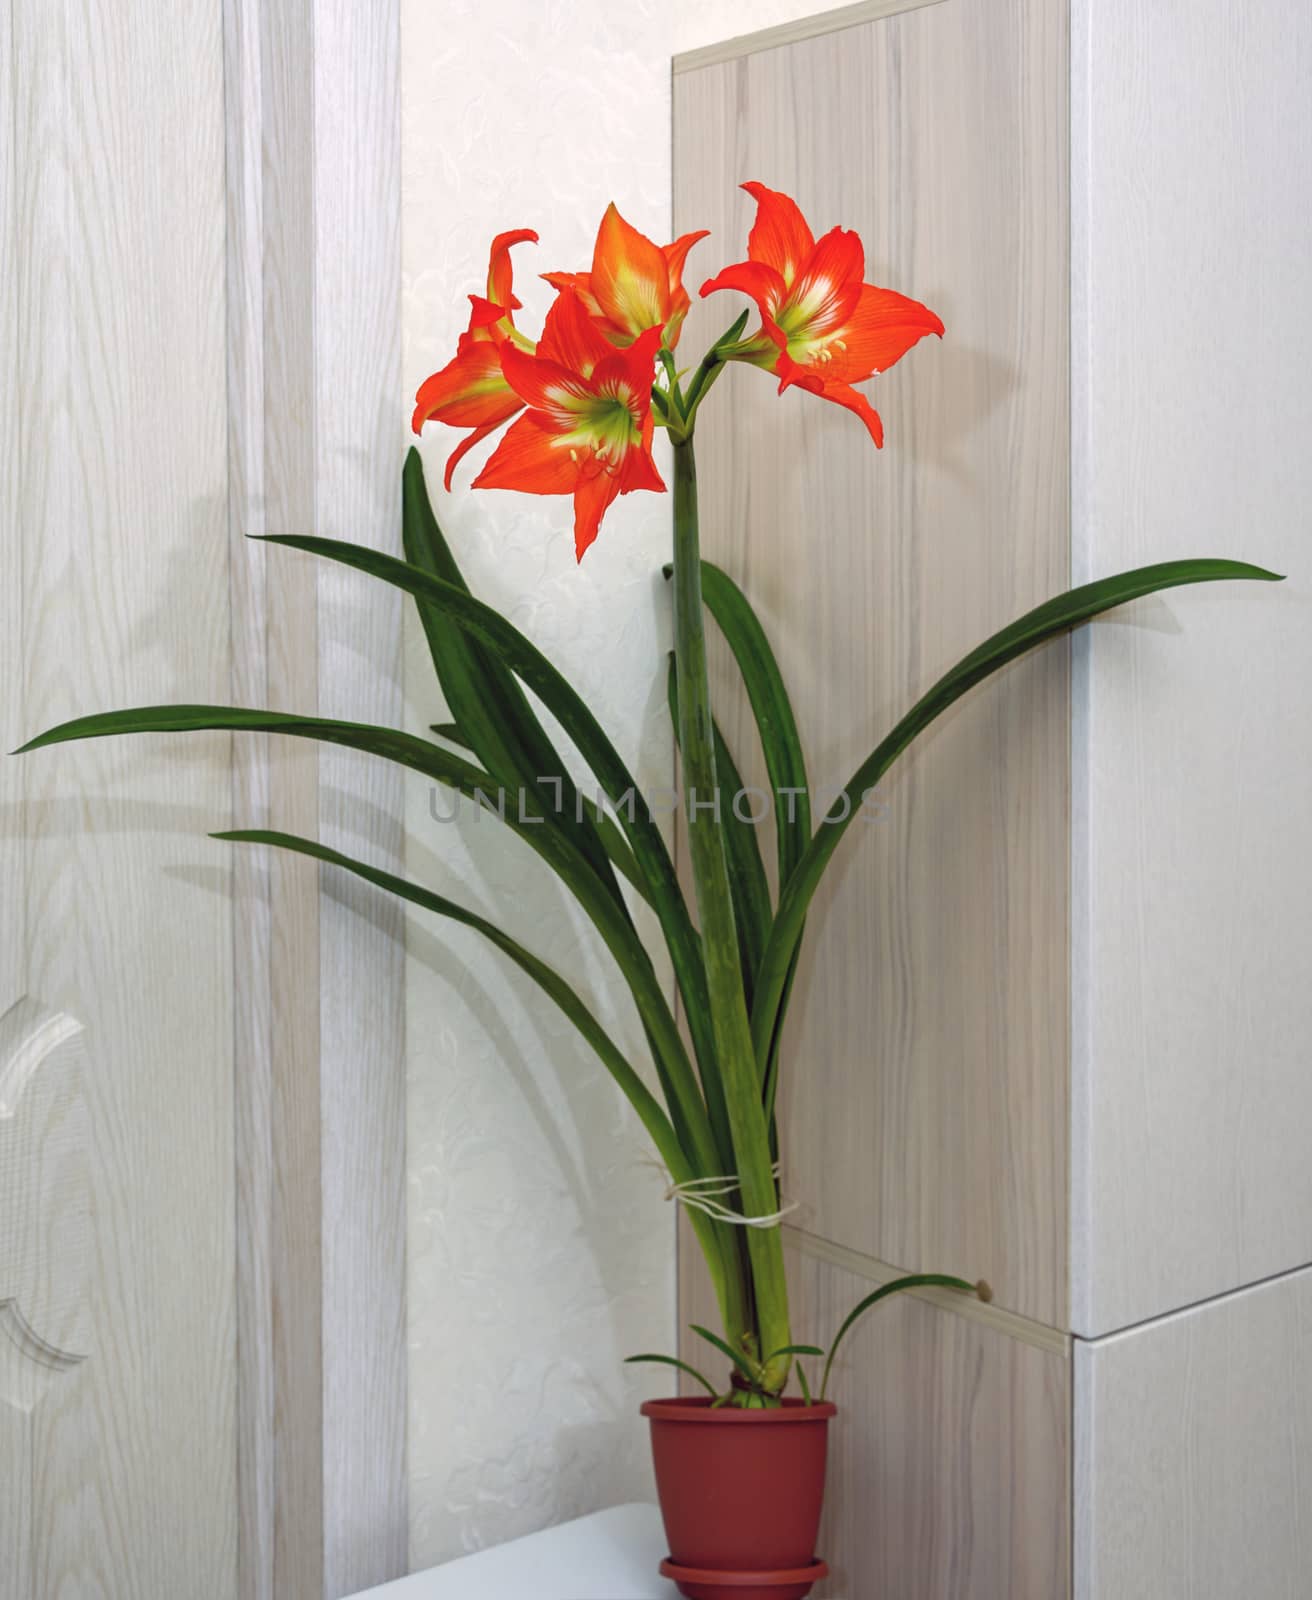 Hippeastrum, bright, red and orange with a white-green core, blossomed in four large flowers on a thick green stem. by vladali